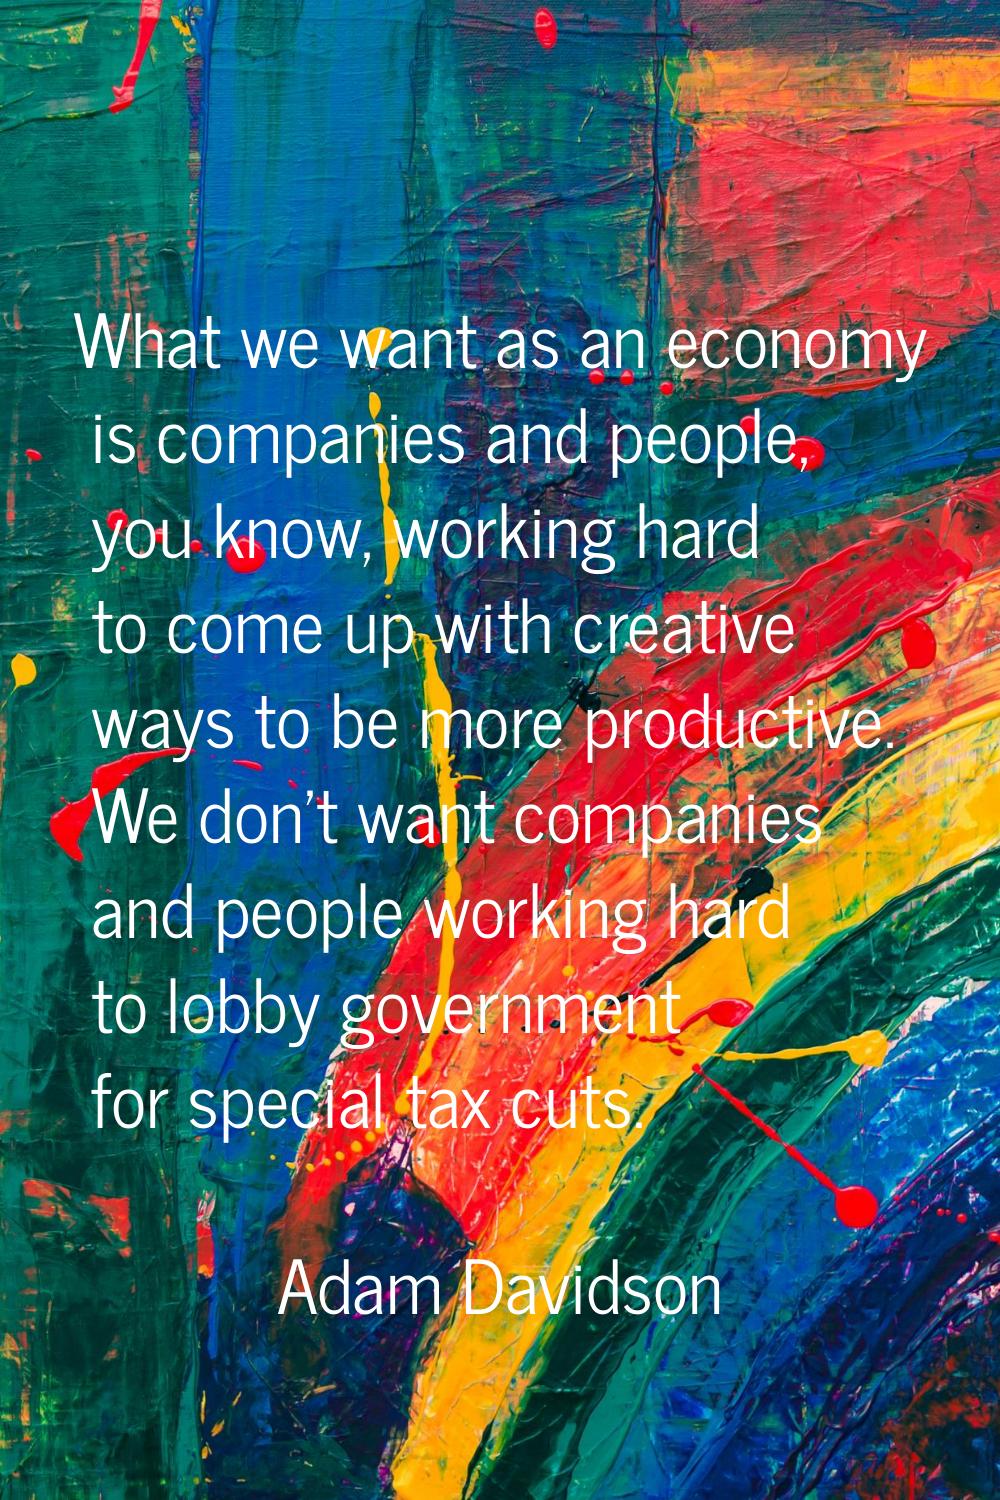 What we want as an economy is companies and people, you know, working hard to come up with creative